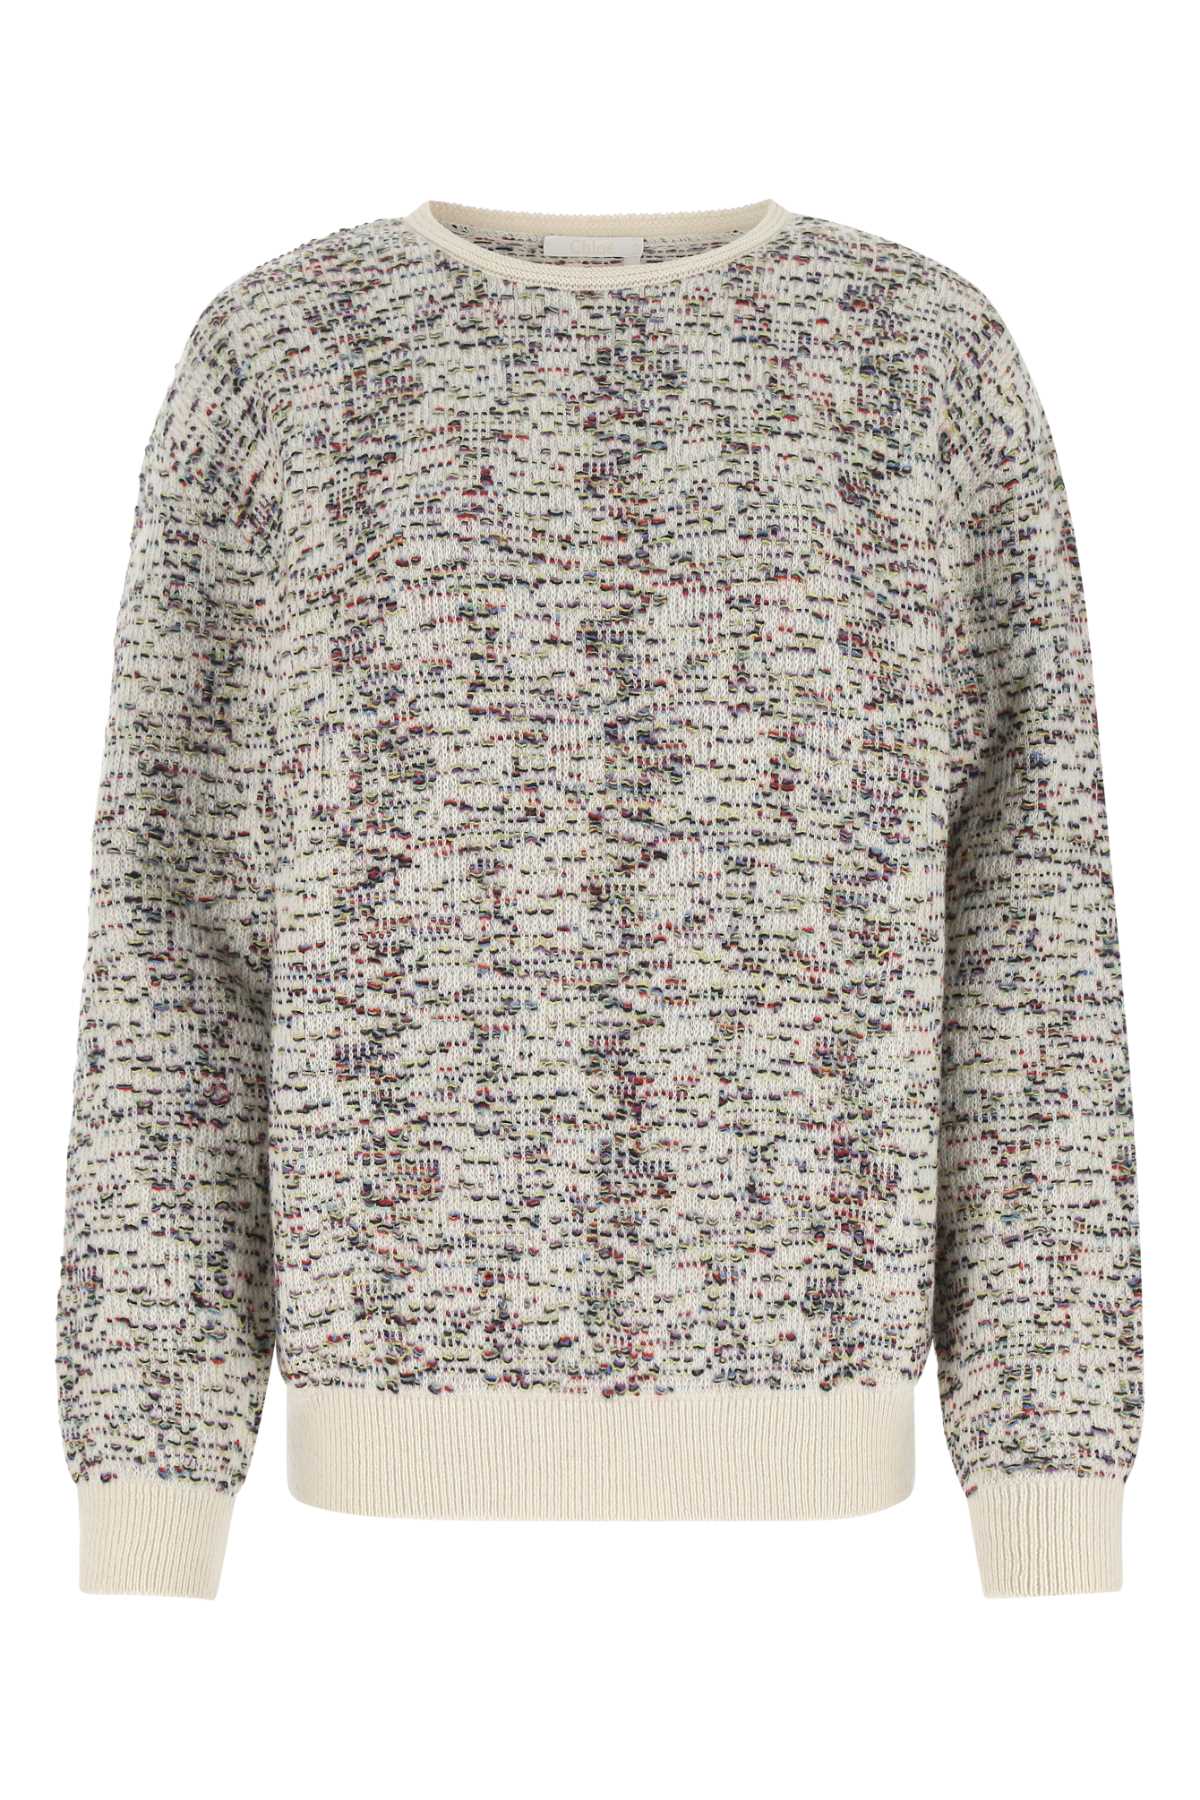 Chloé Embroidered Cashmere Blend Sweater